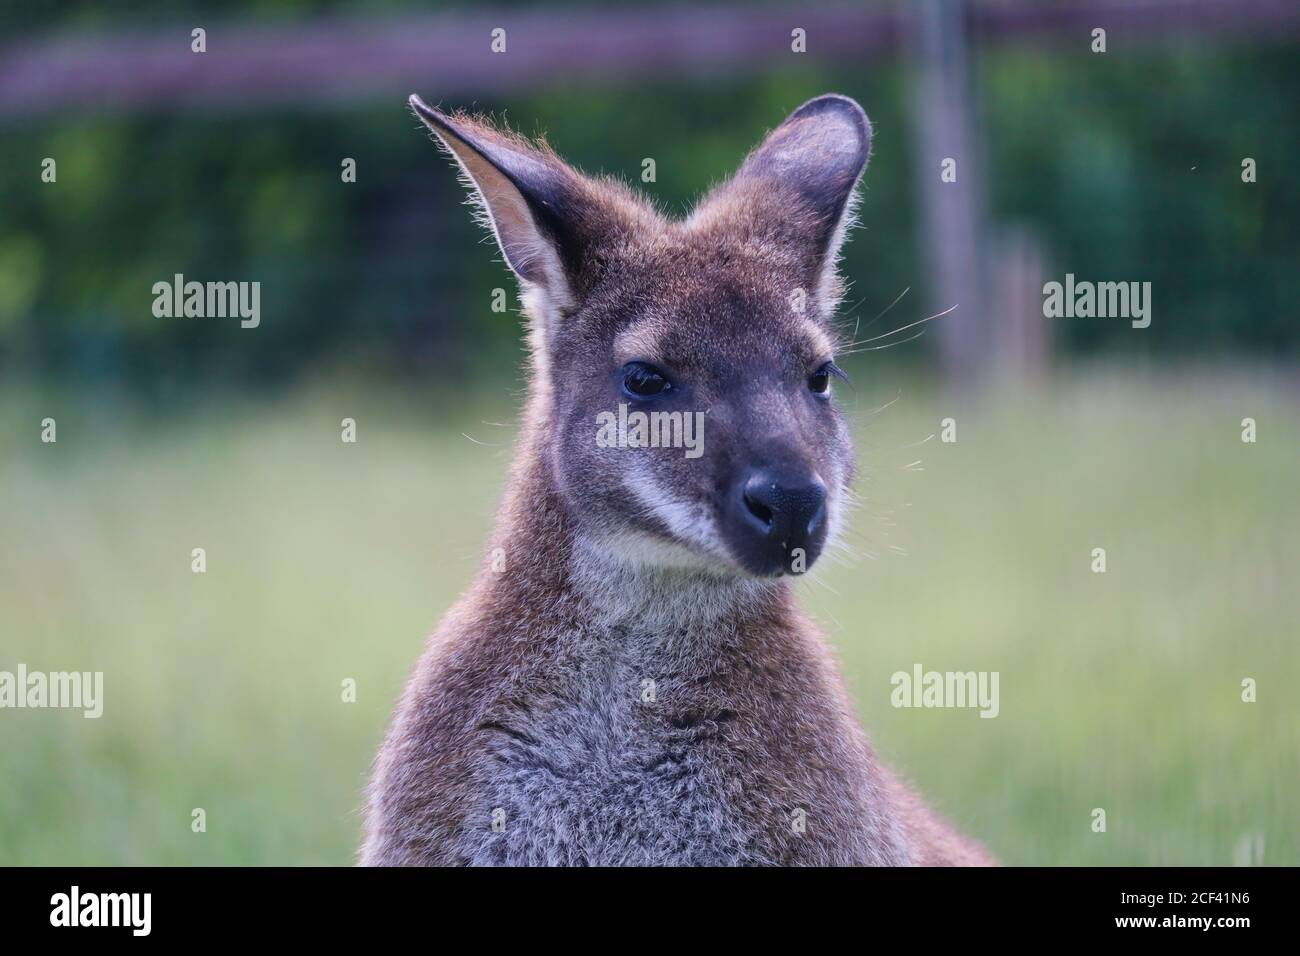 Closeup of The Red-Necked Wallaby or Bennett's Wallaby (Macropus Rufogriseus) in Czech Farm Park. Head Portrait of Cute Brown Tasmanian Wallaby. Stock Photo